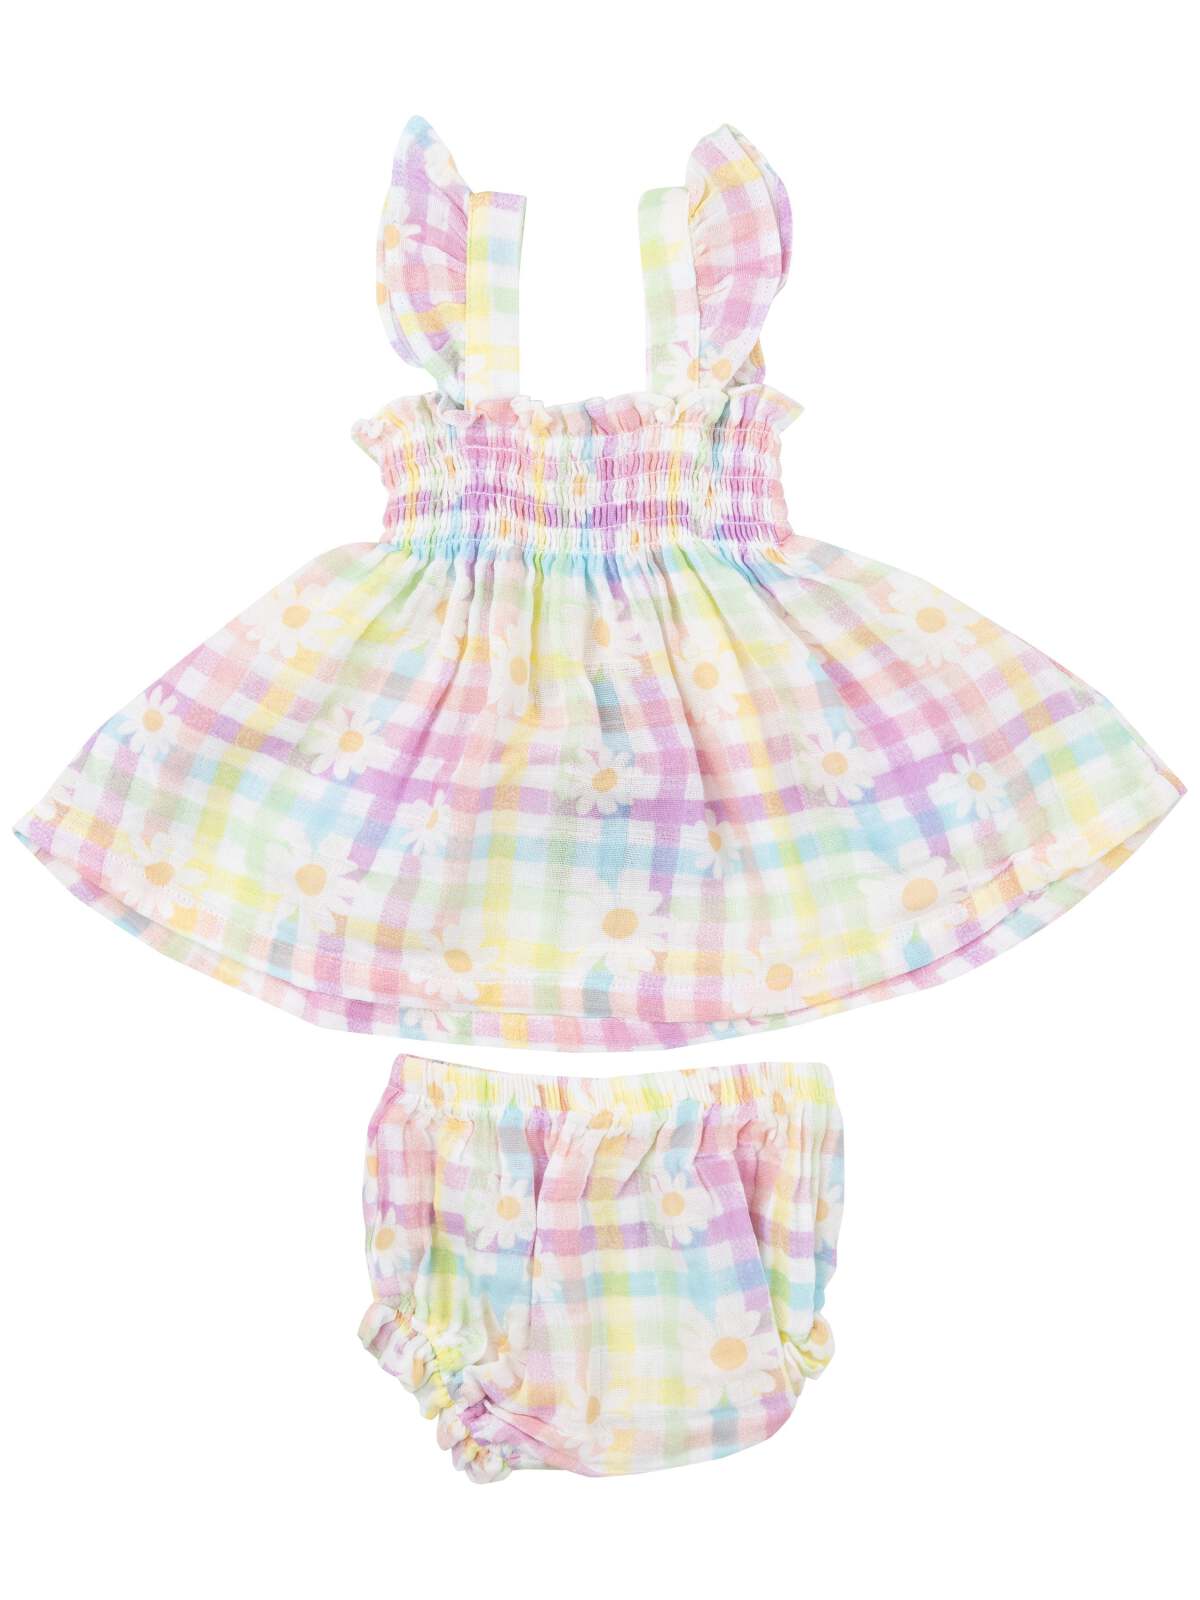 Ruffle Strap Smocked Top & Bloomer, Gingham Daisy